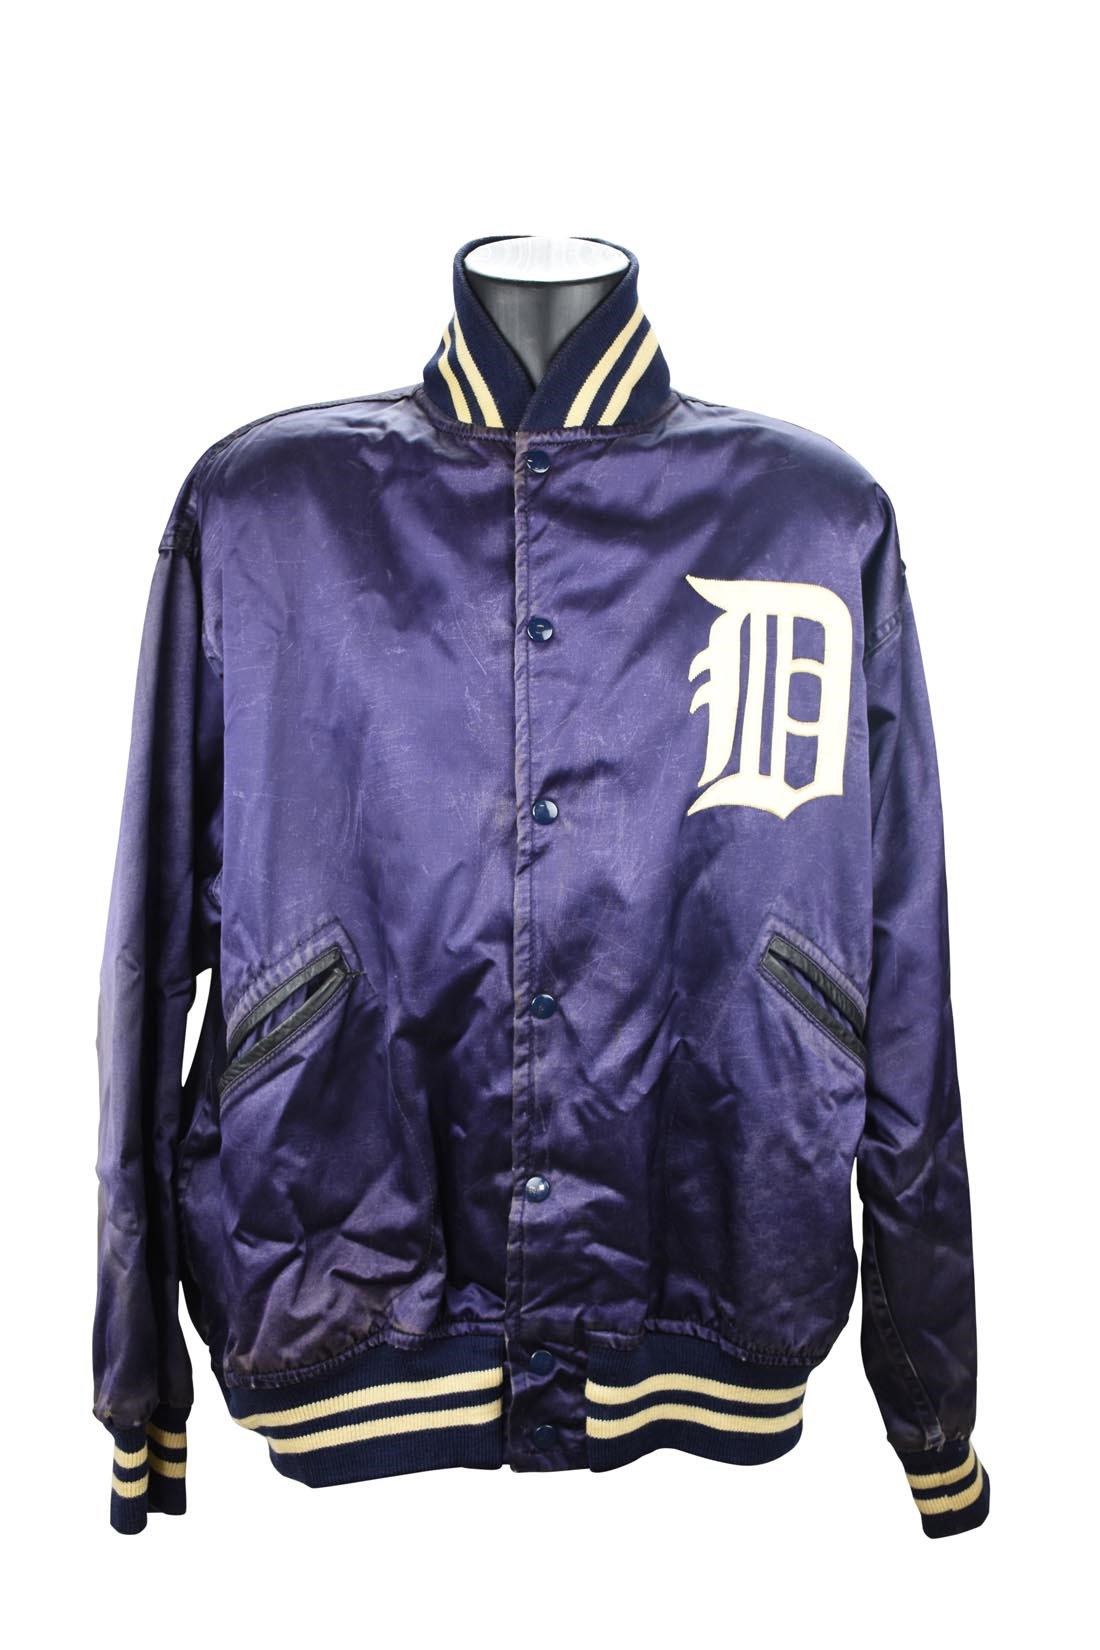 Ty Cobb and Detroit Tigers - Circa 1968 Mickey Lolich Detroit Tigers Satin Jacket with Provenance